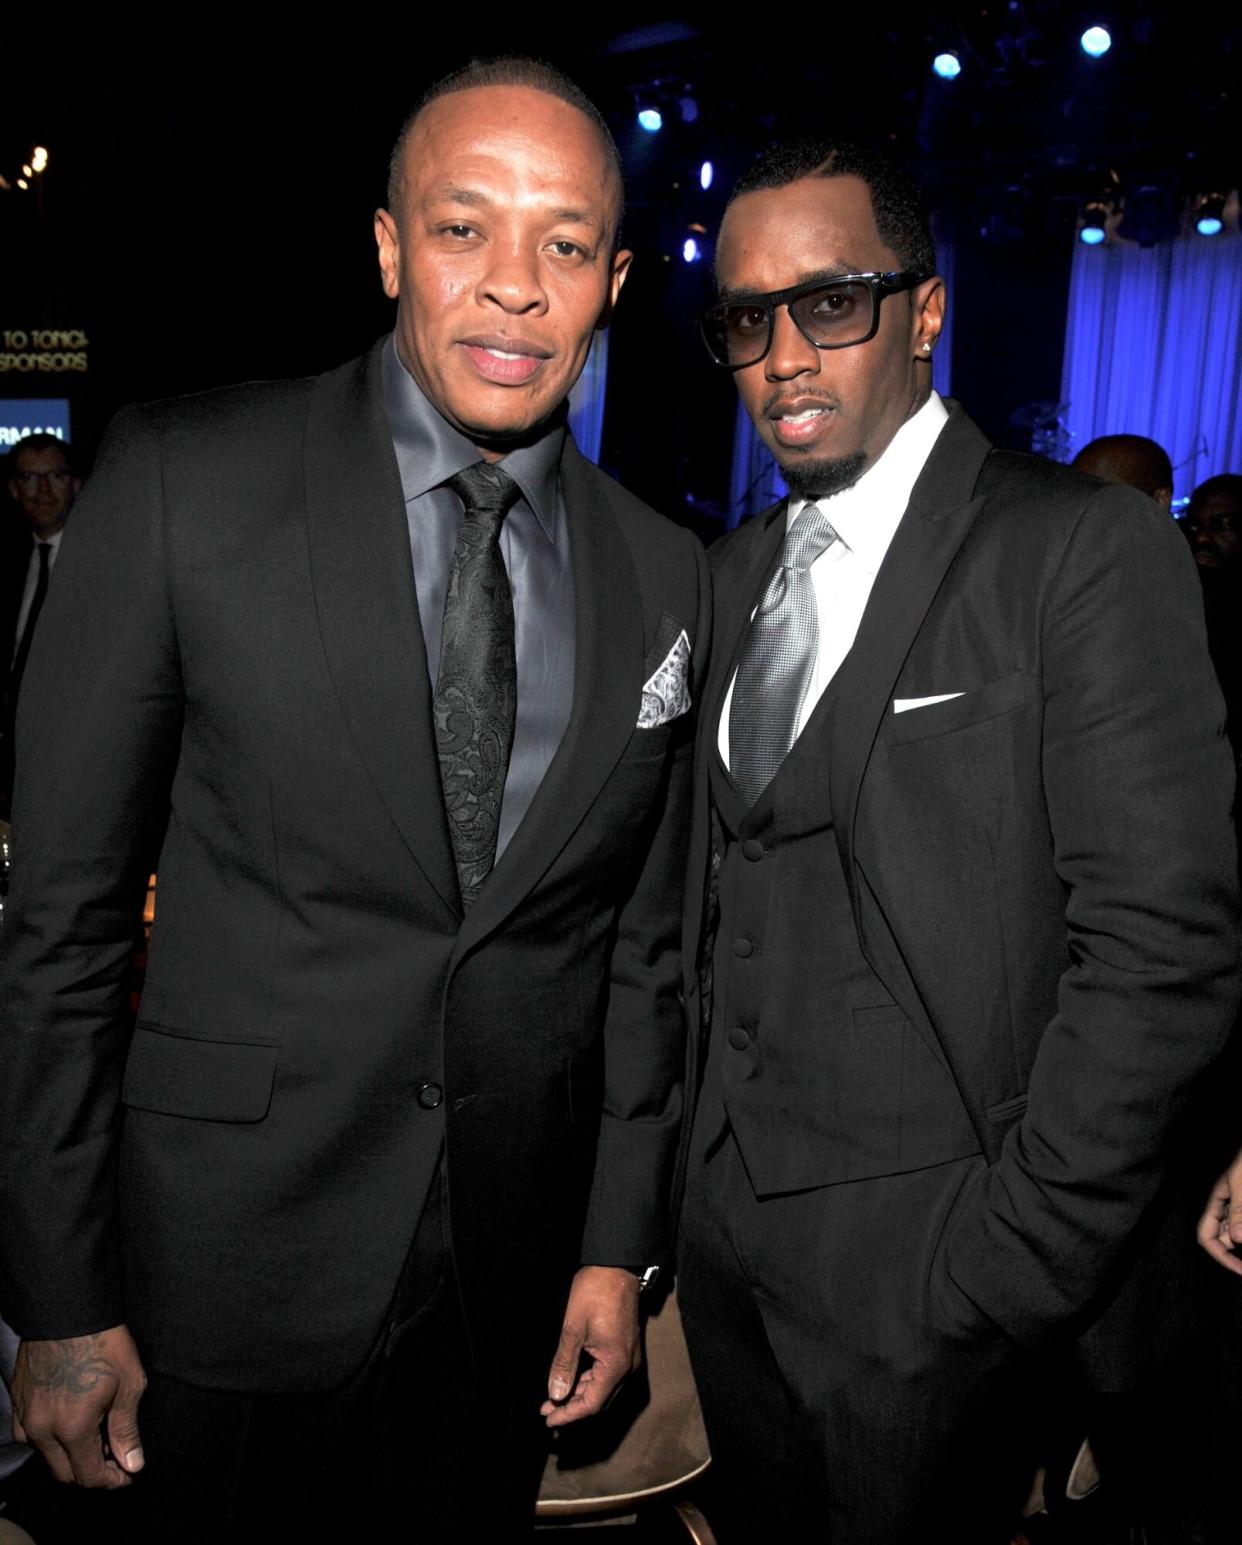 Producer Dr. Dre (L) and musician Sean 'Diddy' Combs